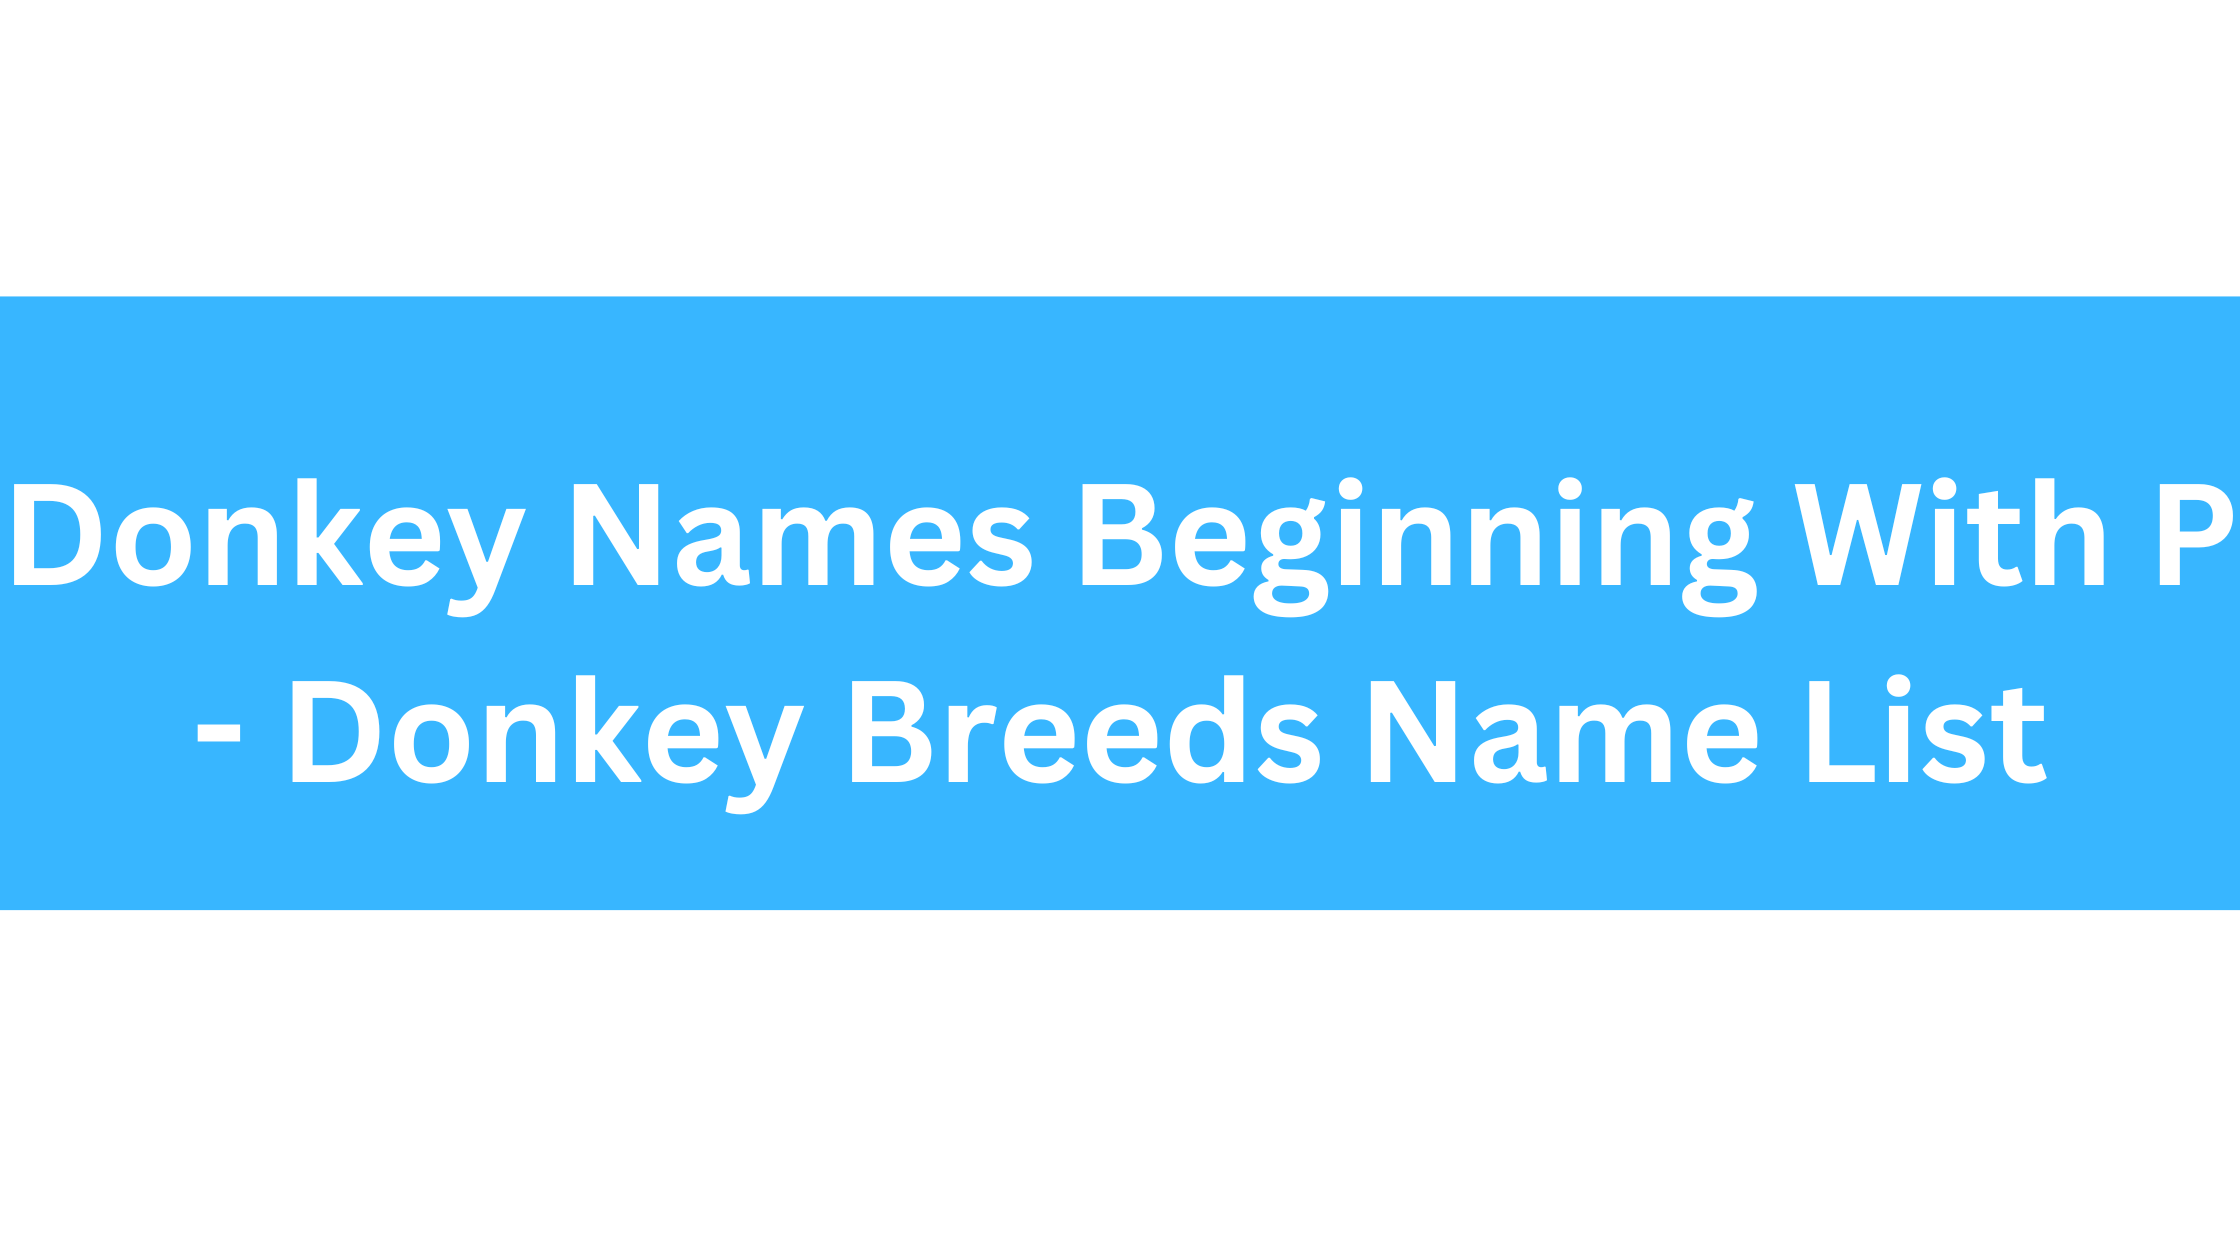 Donkey Names Beginning With P